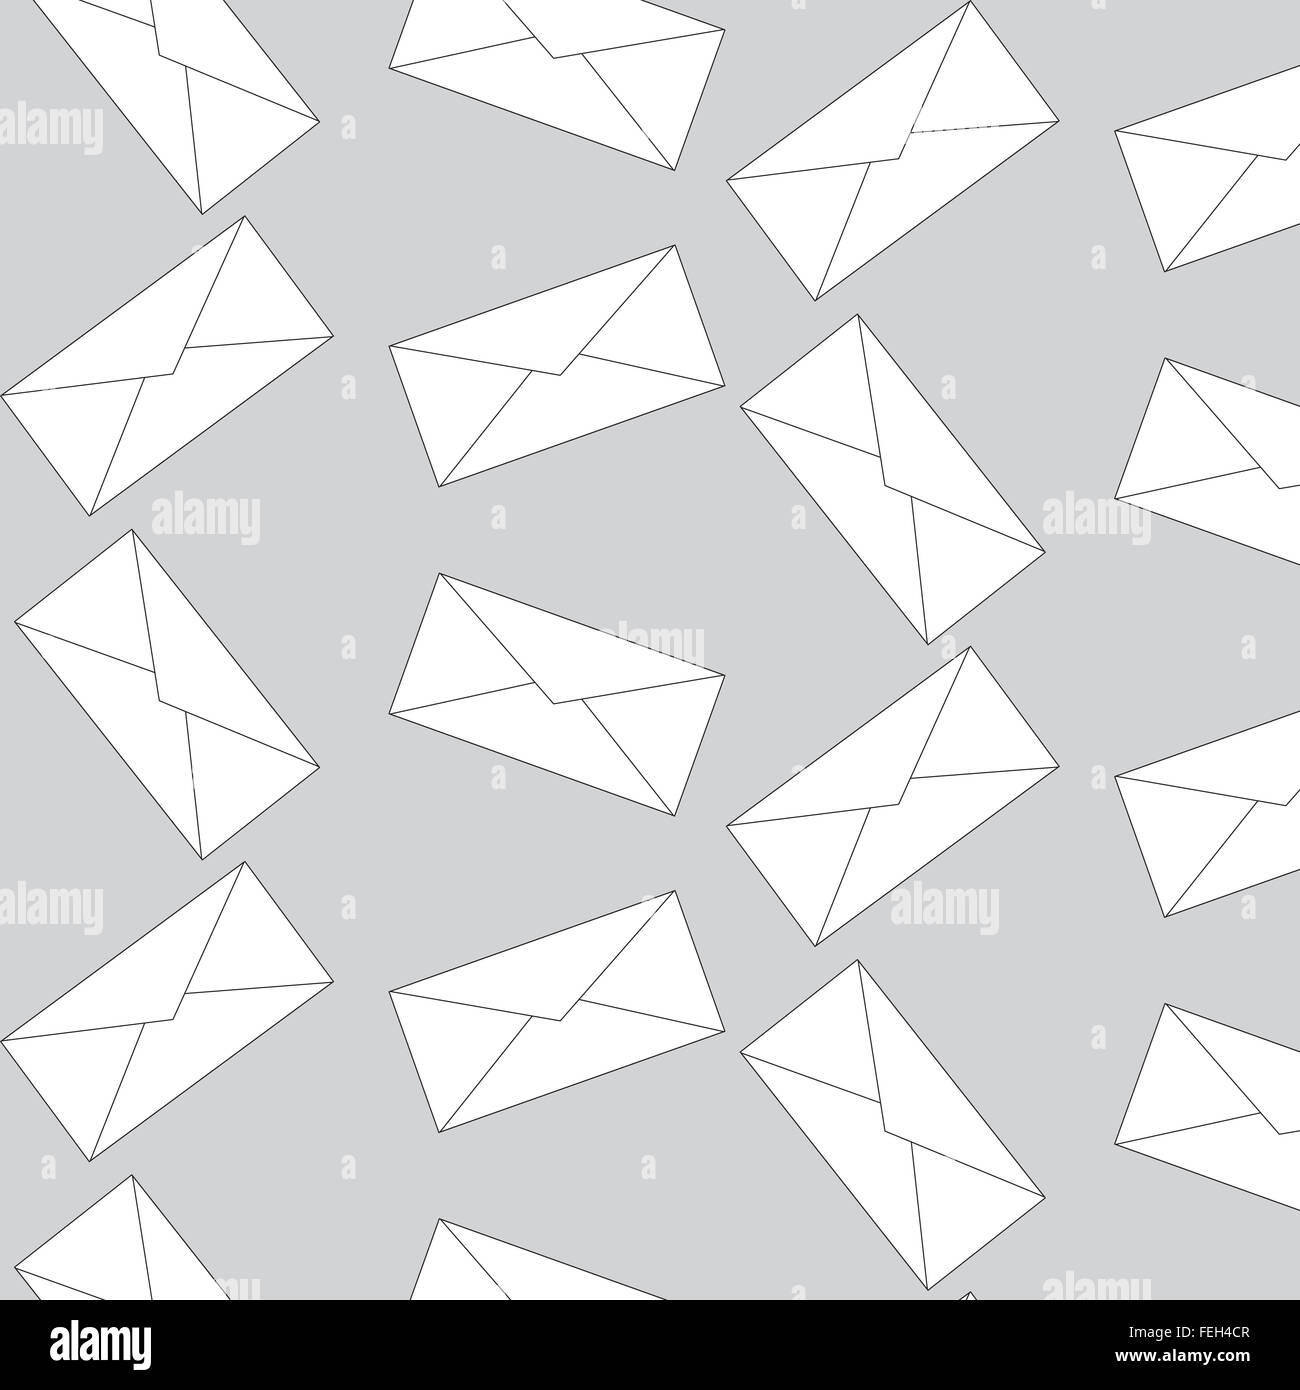 Envelope mail pattern seamless. Message letter, spam pattern, background endless. Vector art abstract unusual fashion illustrati Stock Photo